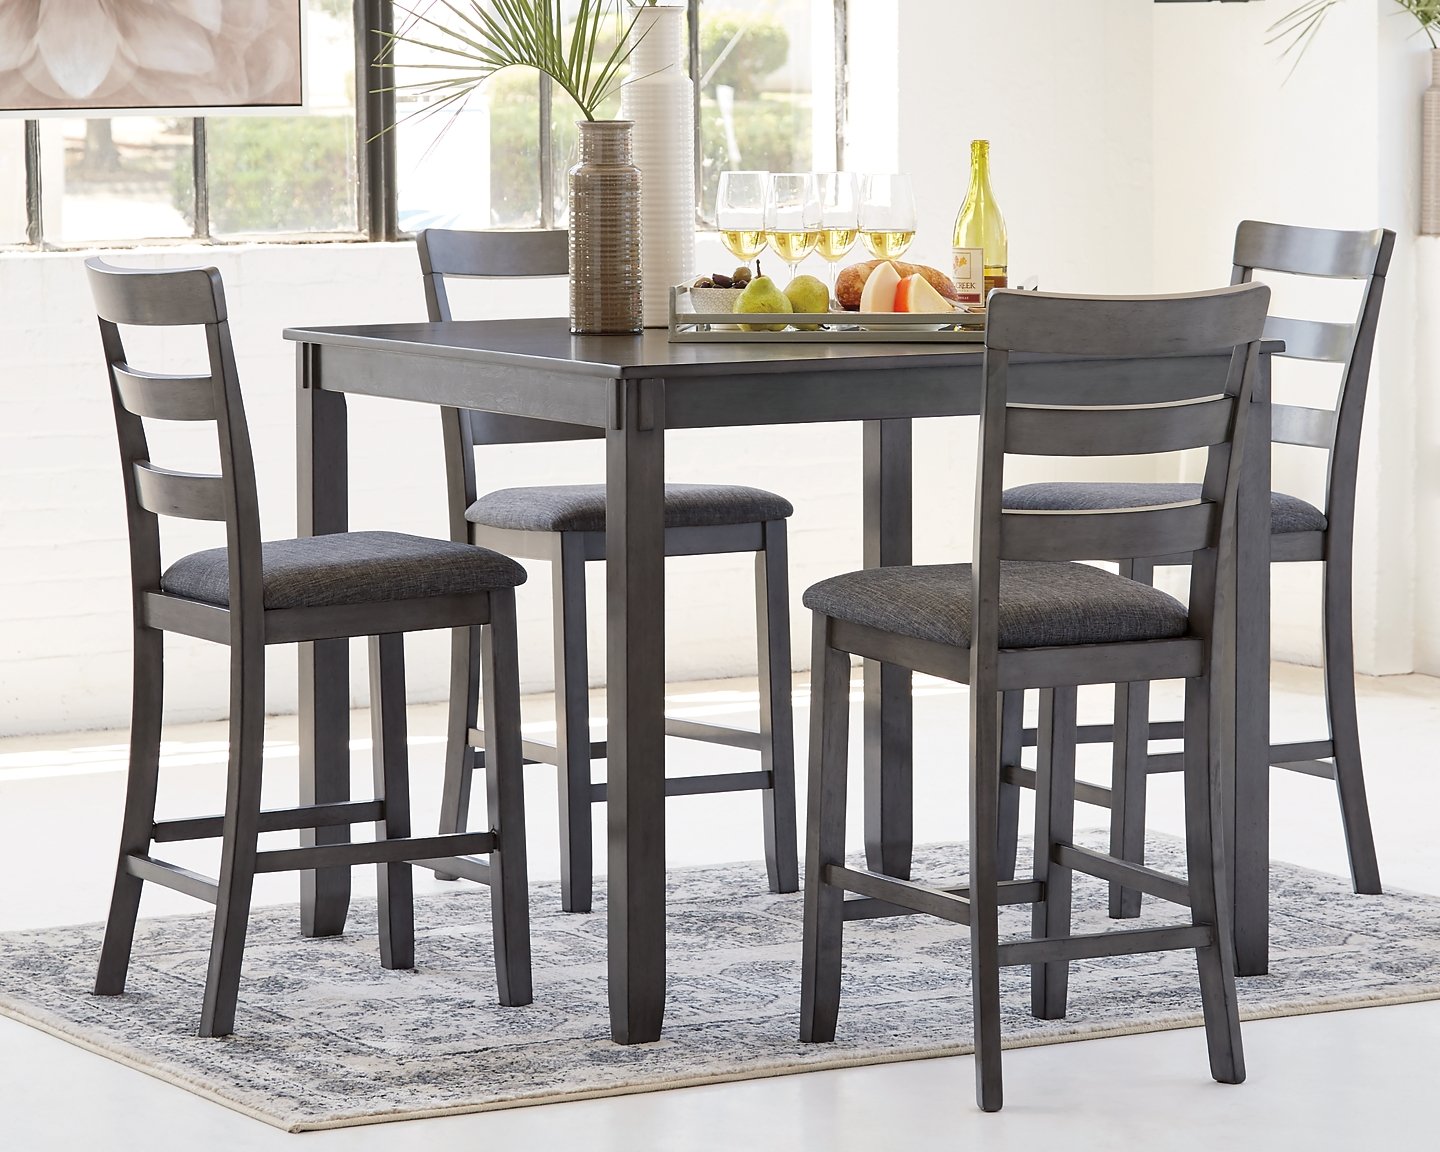 Bridson Counter Height Dining Room Table and Bar Stools (Set of 5)